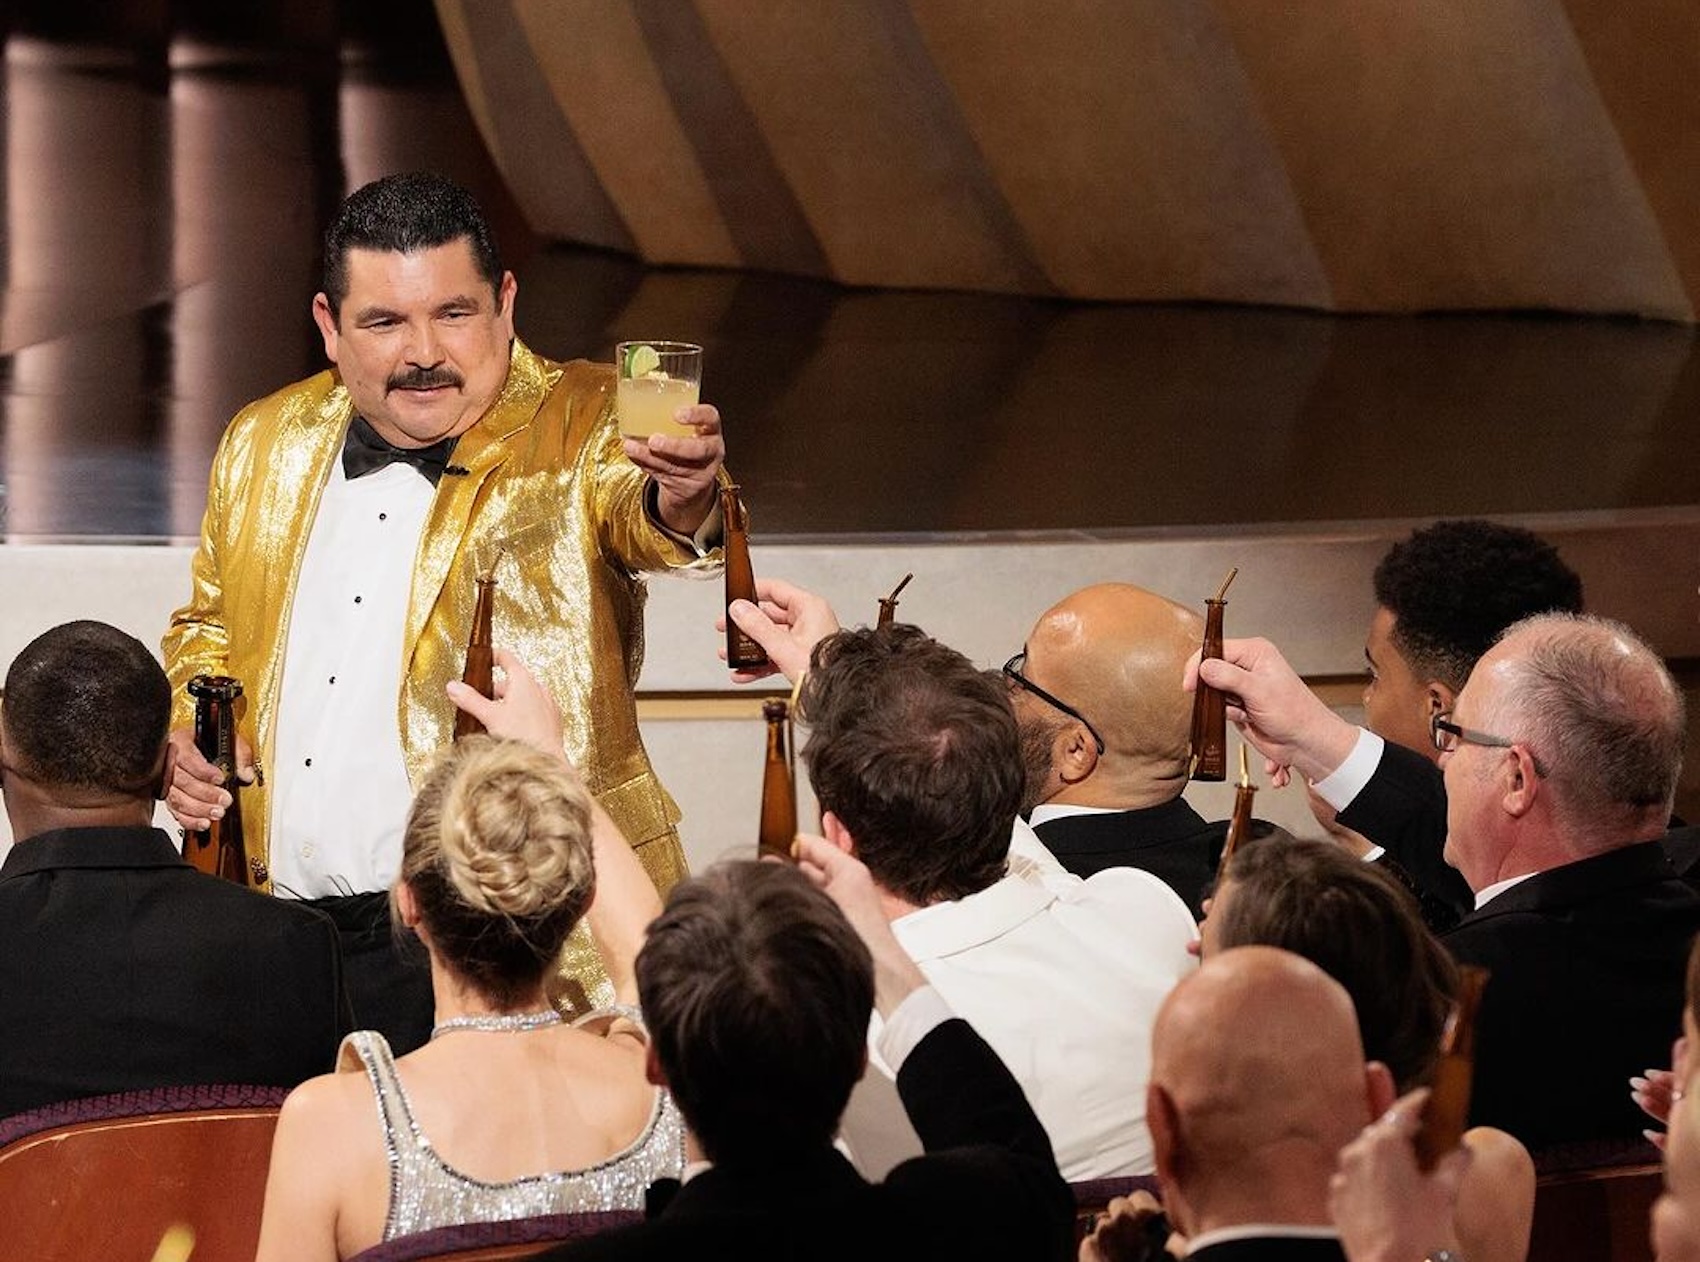 Guillermo Jimmy Kimmel at Oscar Academy Awards Anejo tequila toast with Coleman Domingo